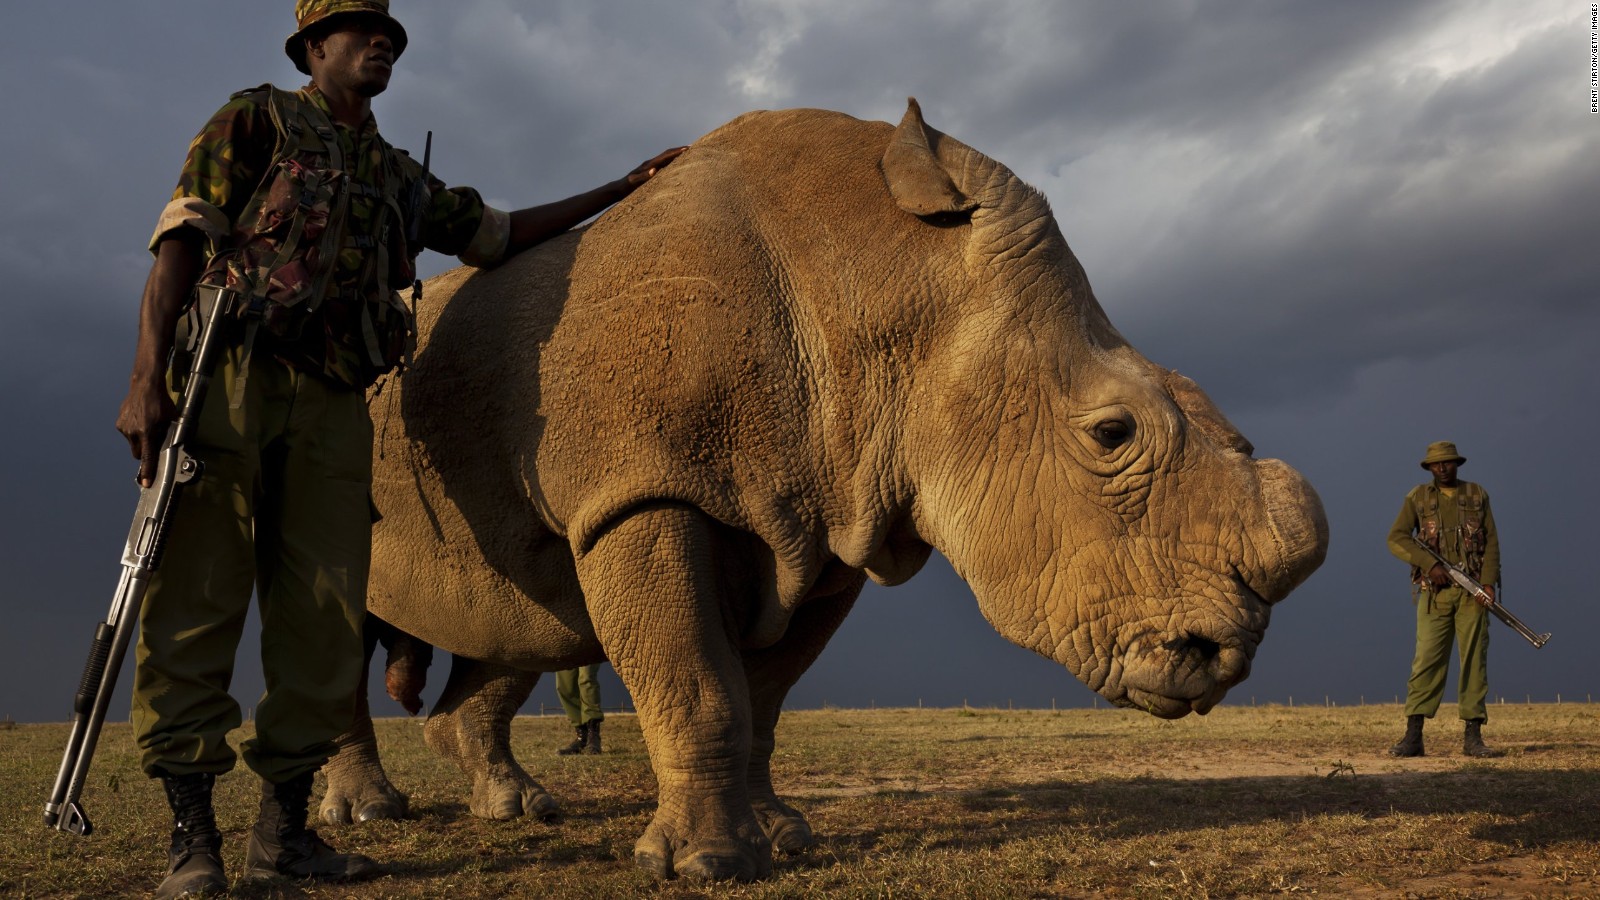 Sudan, Kenya's last Rhino who was 45, lived at the Ol Pejeta Conservancy in Kenya died last year. The species is now extinct due the Chinese demand for Rhino horn.